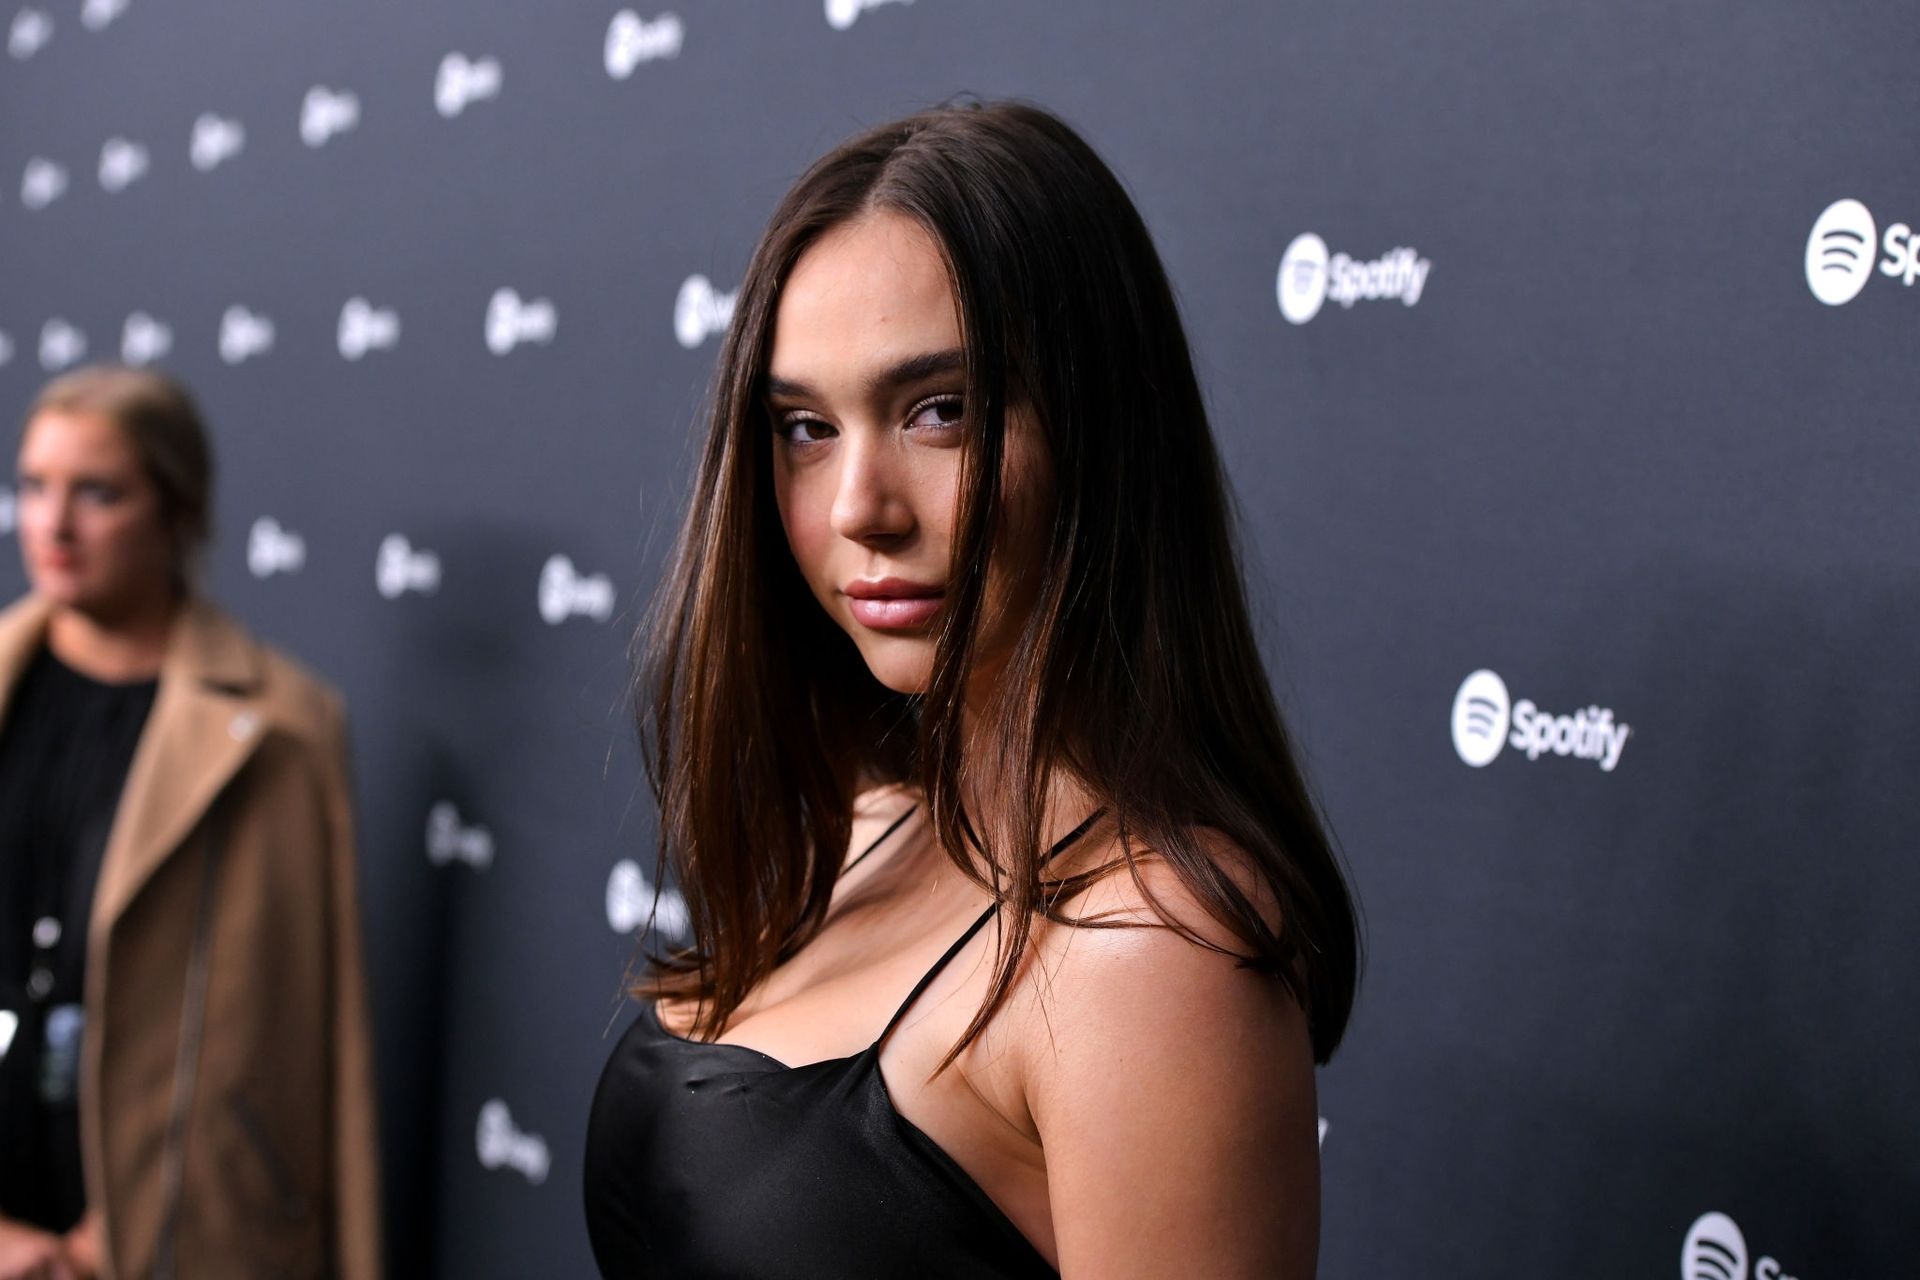 Alexis Ren Shows Off Her Tits At The Spotify Best New Artist Party 0011